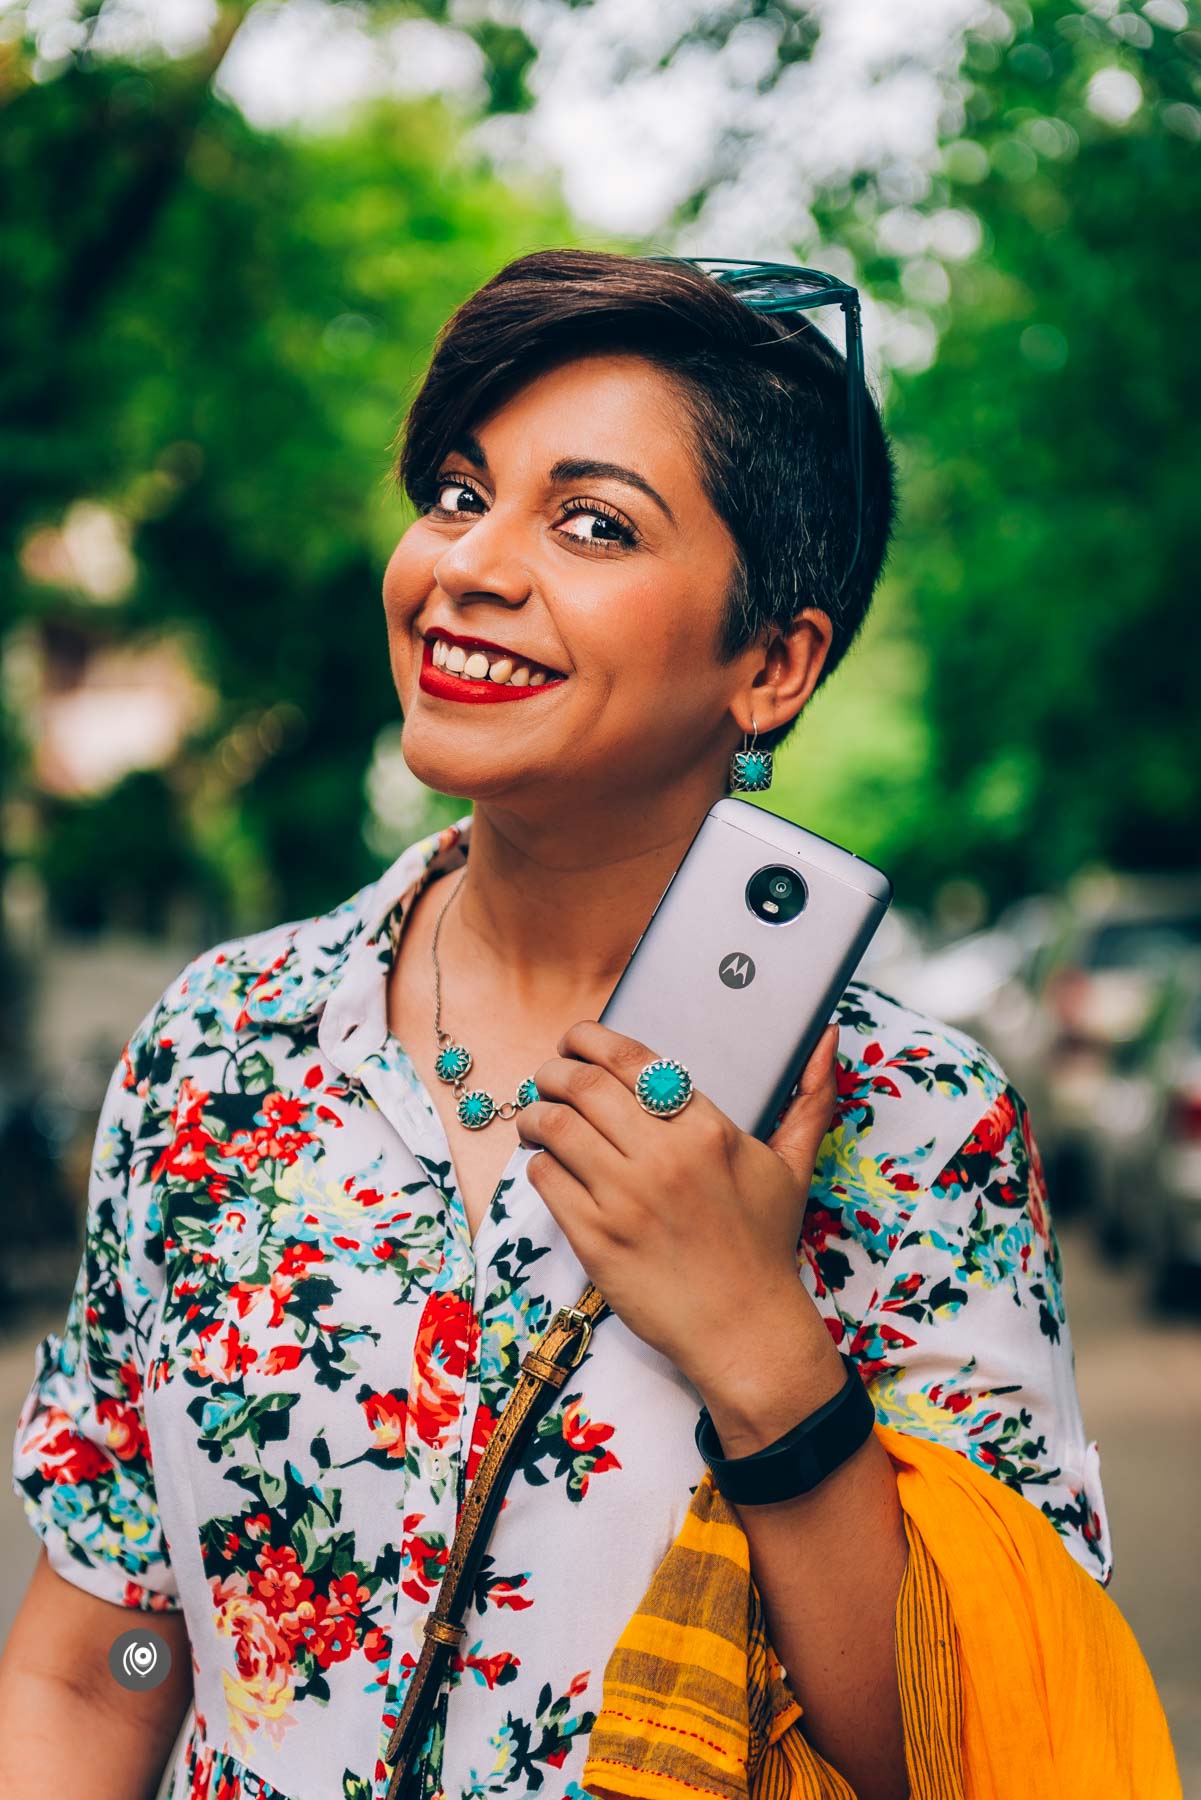 Naina.co, Naina Redhu, Motorola India, MotoE4Plus, Moto E4 Plus, Mobile Device, EyesForTechnology, Technology, Smartphone, 500 mAH Battery, Long lasting battery, Mobile Phone, Lifestyle, Luxury, Photographer, Blogger, Content Strategist, Content Queen, Video Production, Video Produced, Video